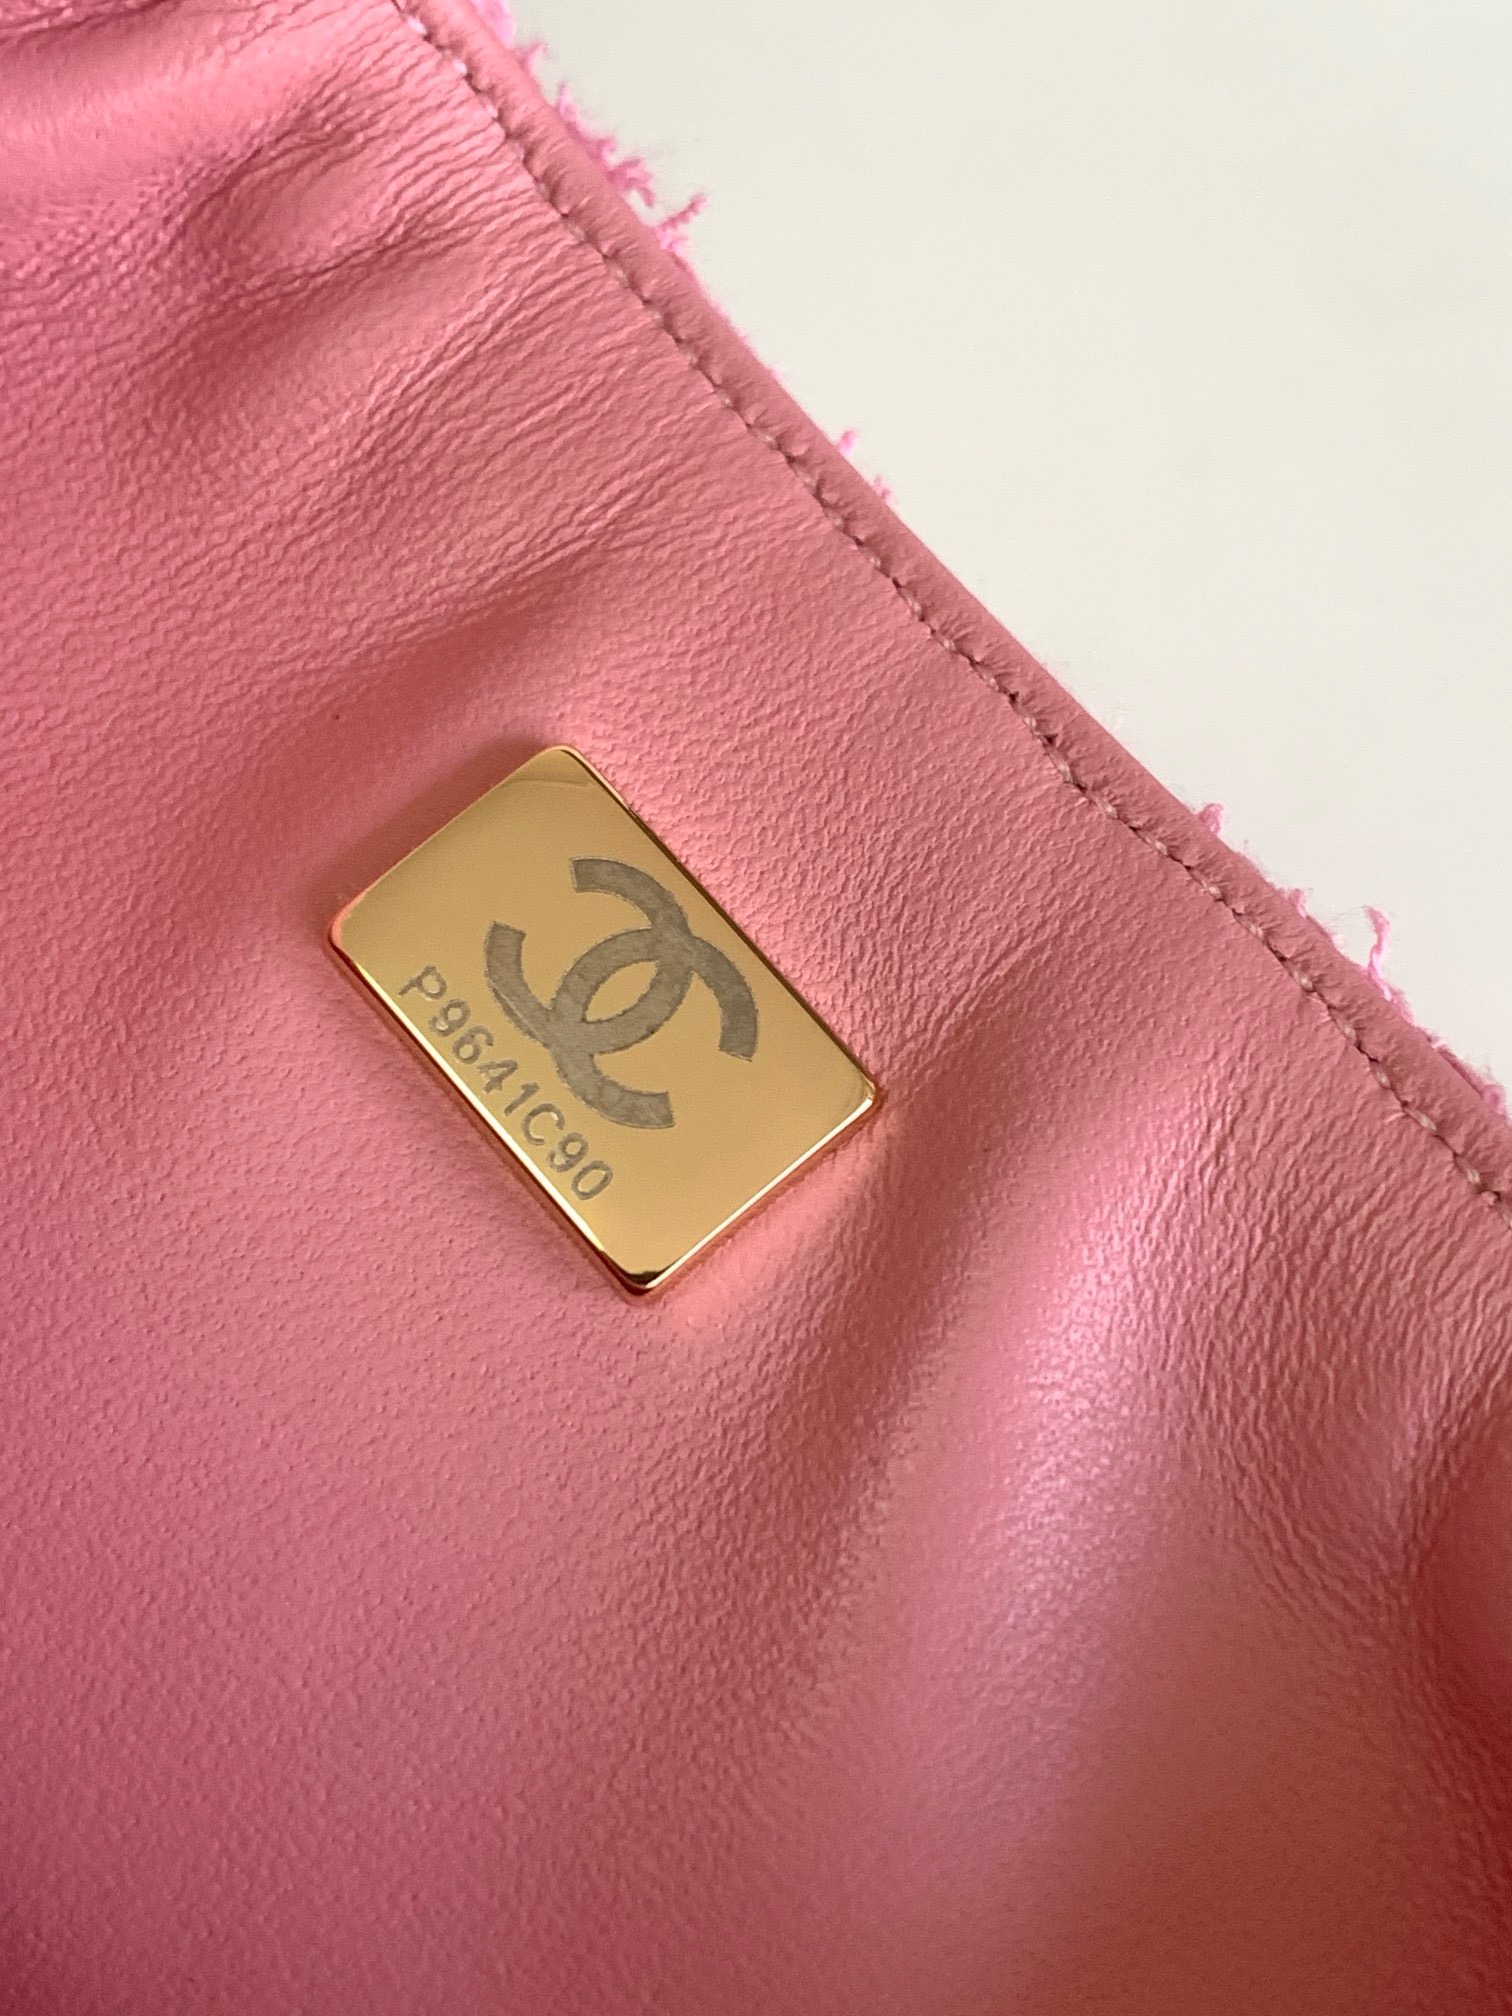 Chanel SMALL FLAP BAG Cotton Tweed AS4384 PINK